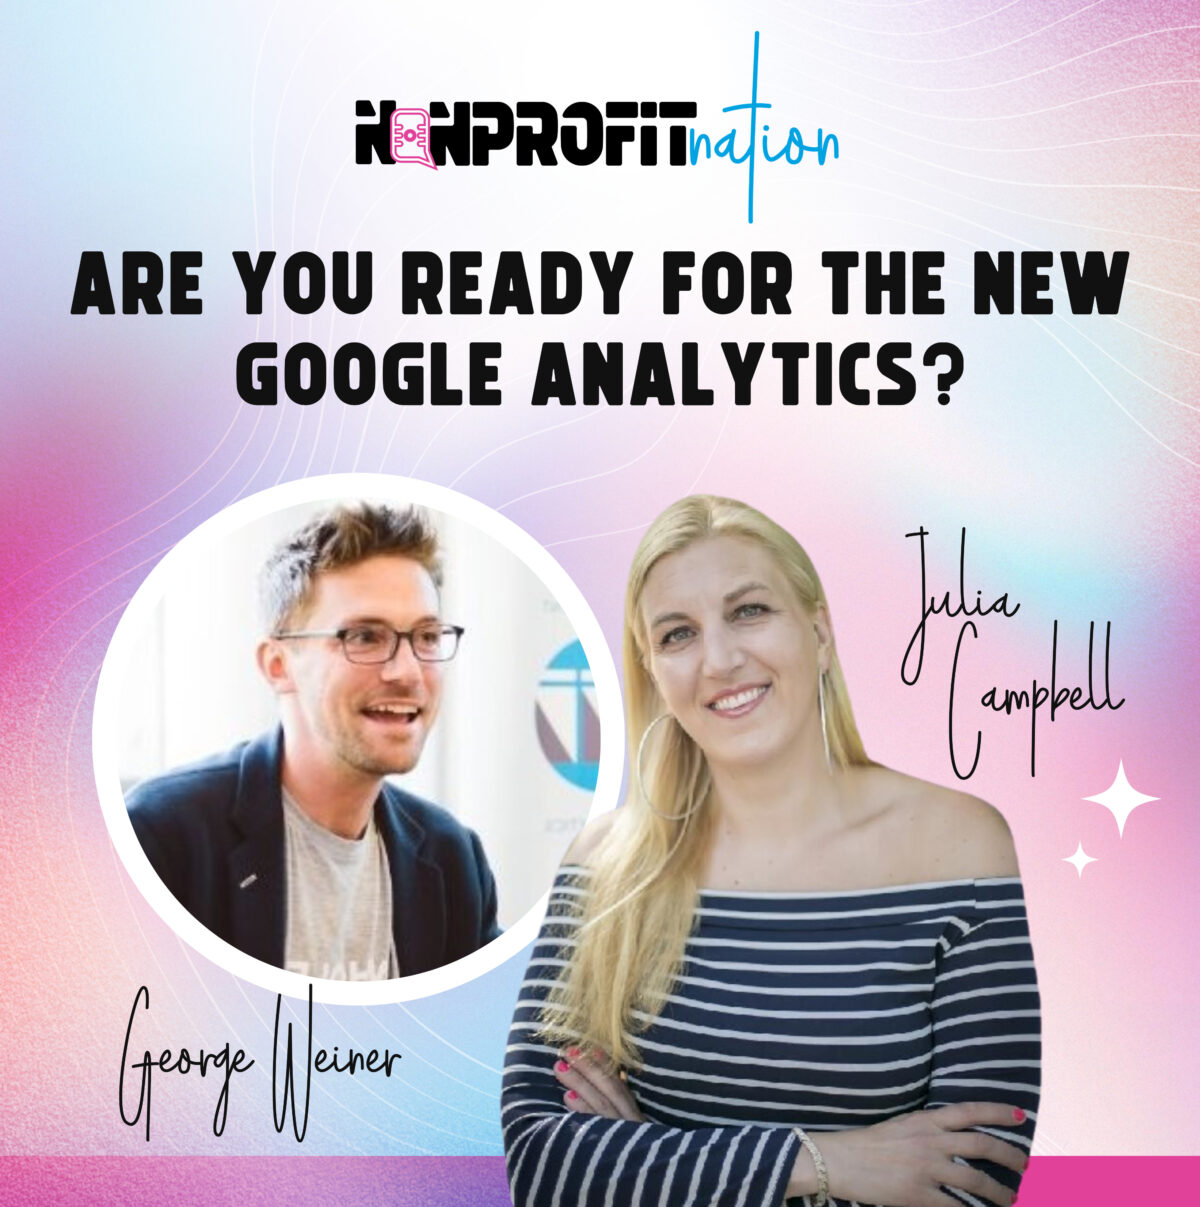 Are You Ready For The New Google Analytics? with George Weiner